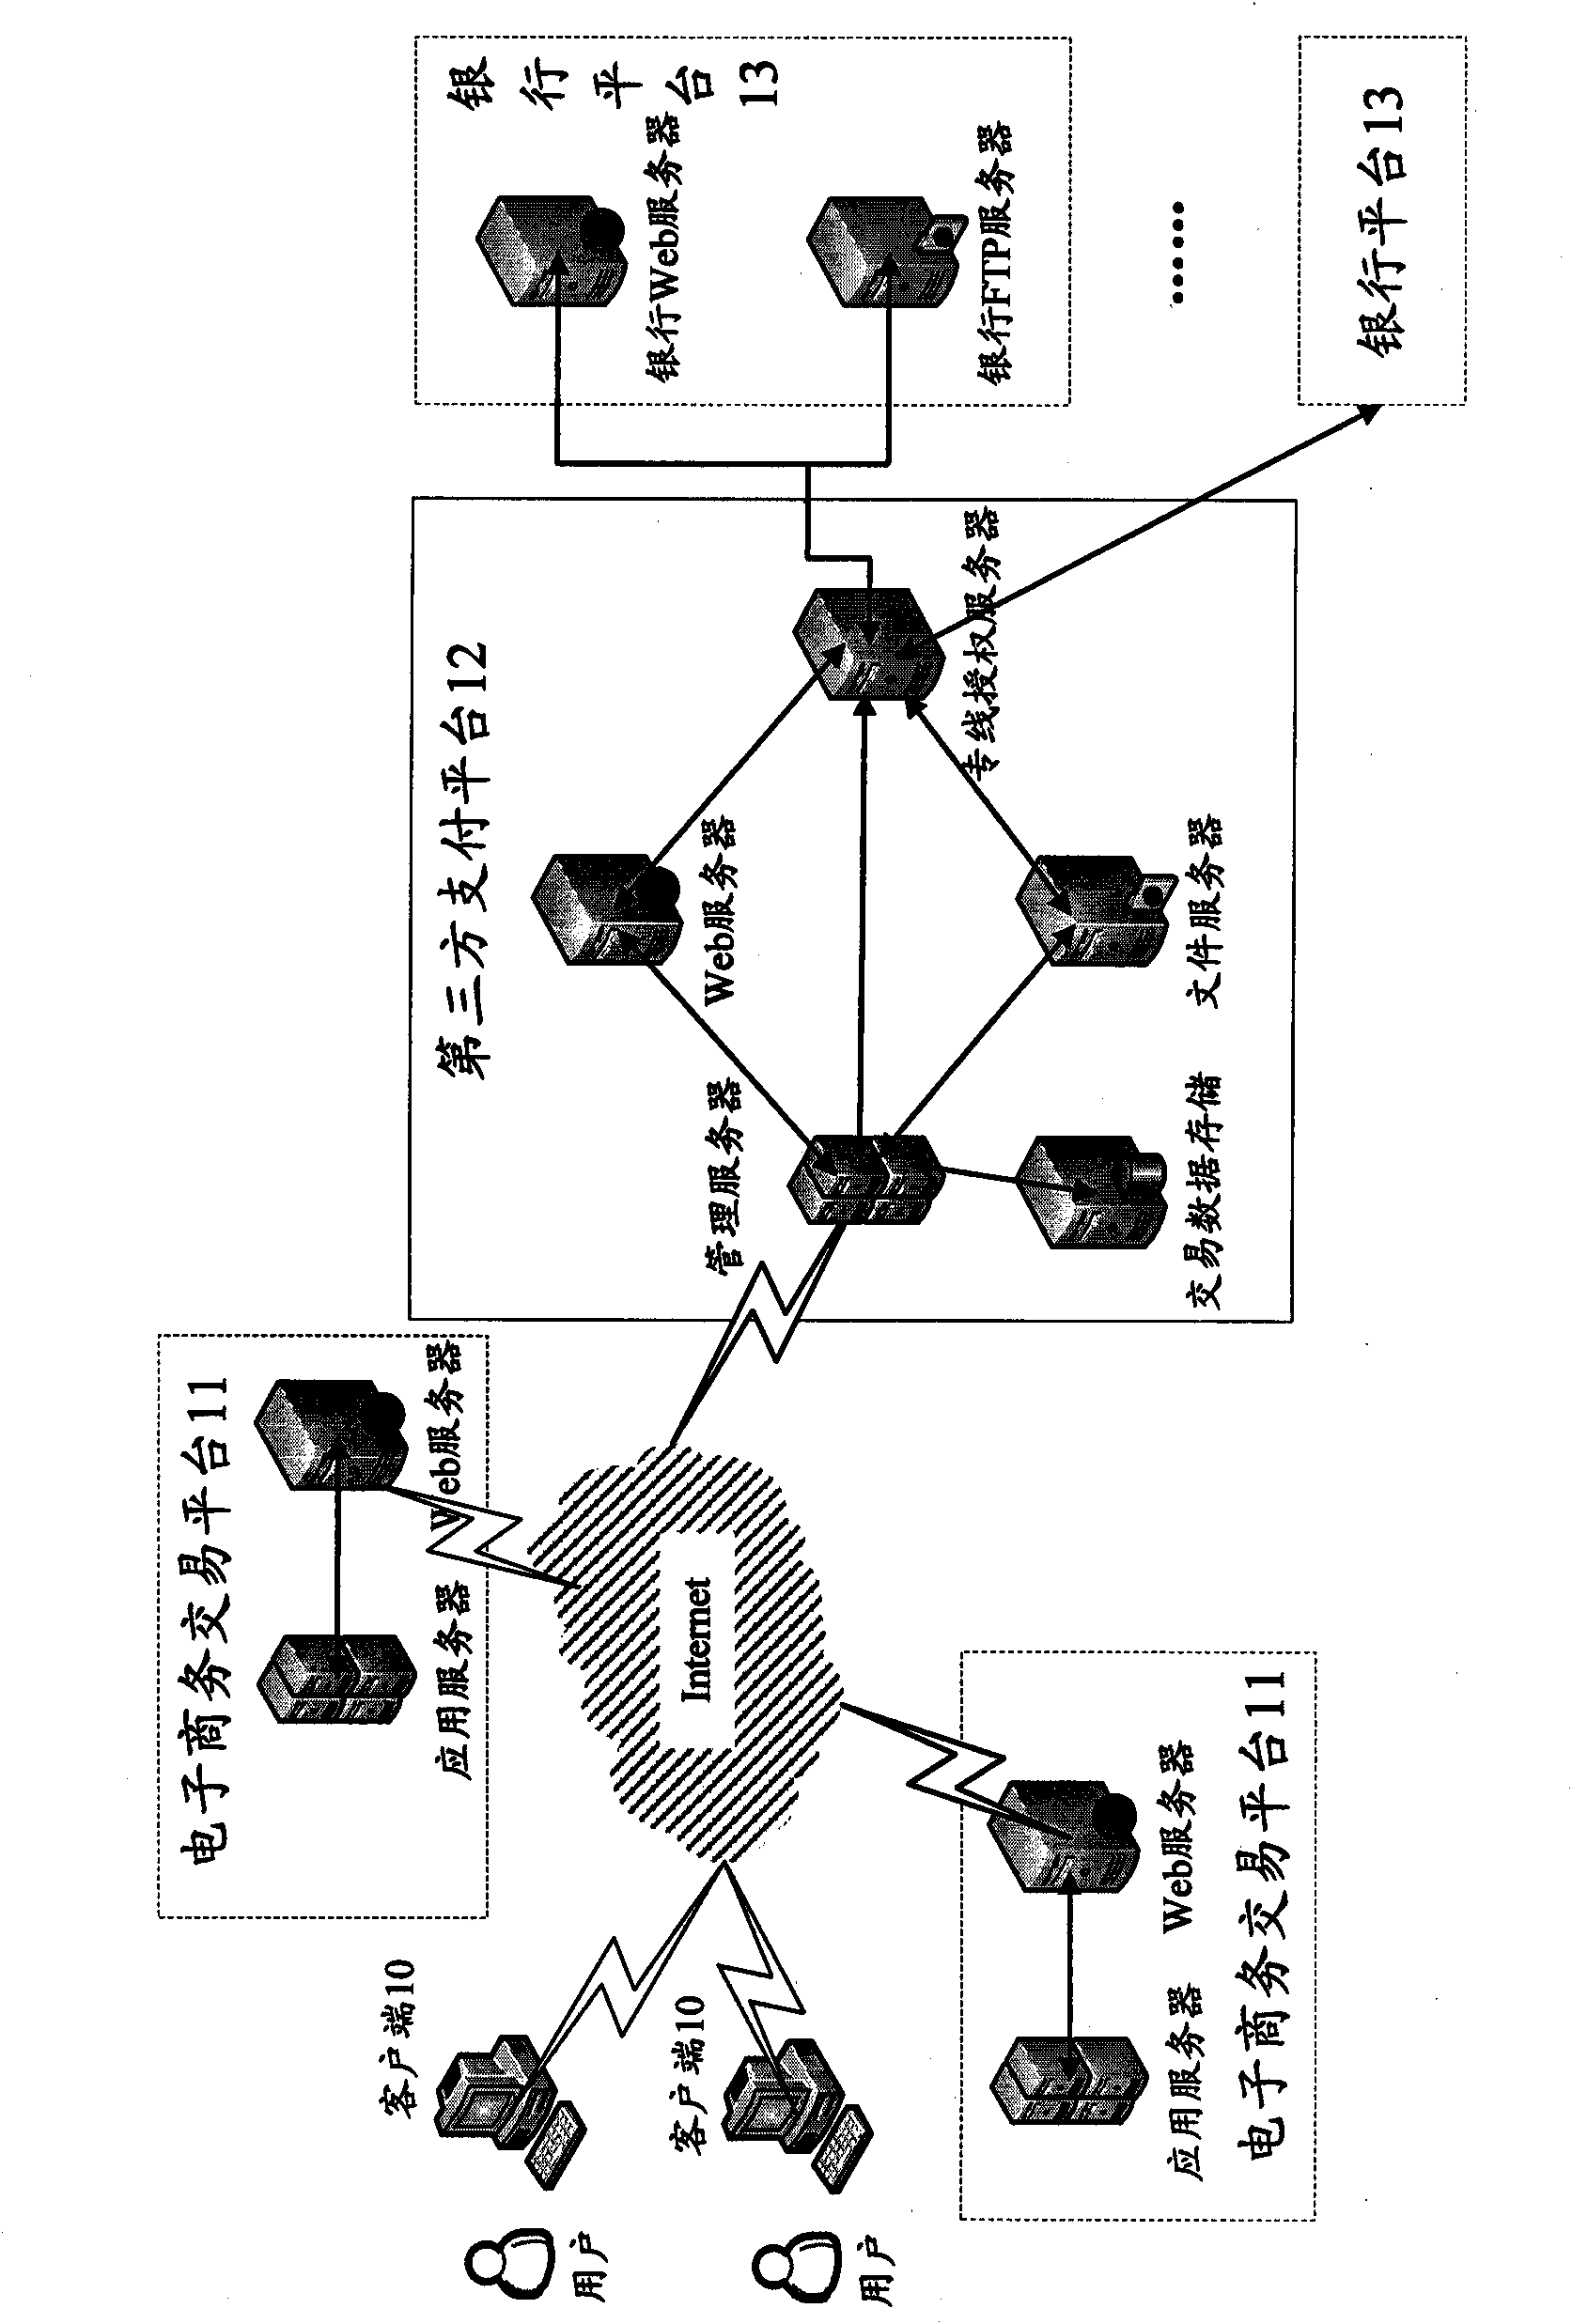 Method and system for achieving service of payment in installments